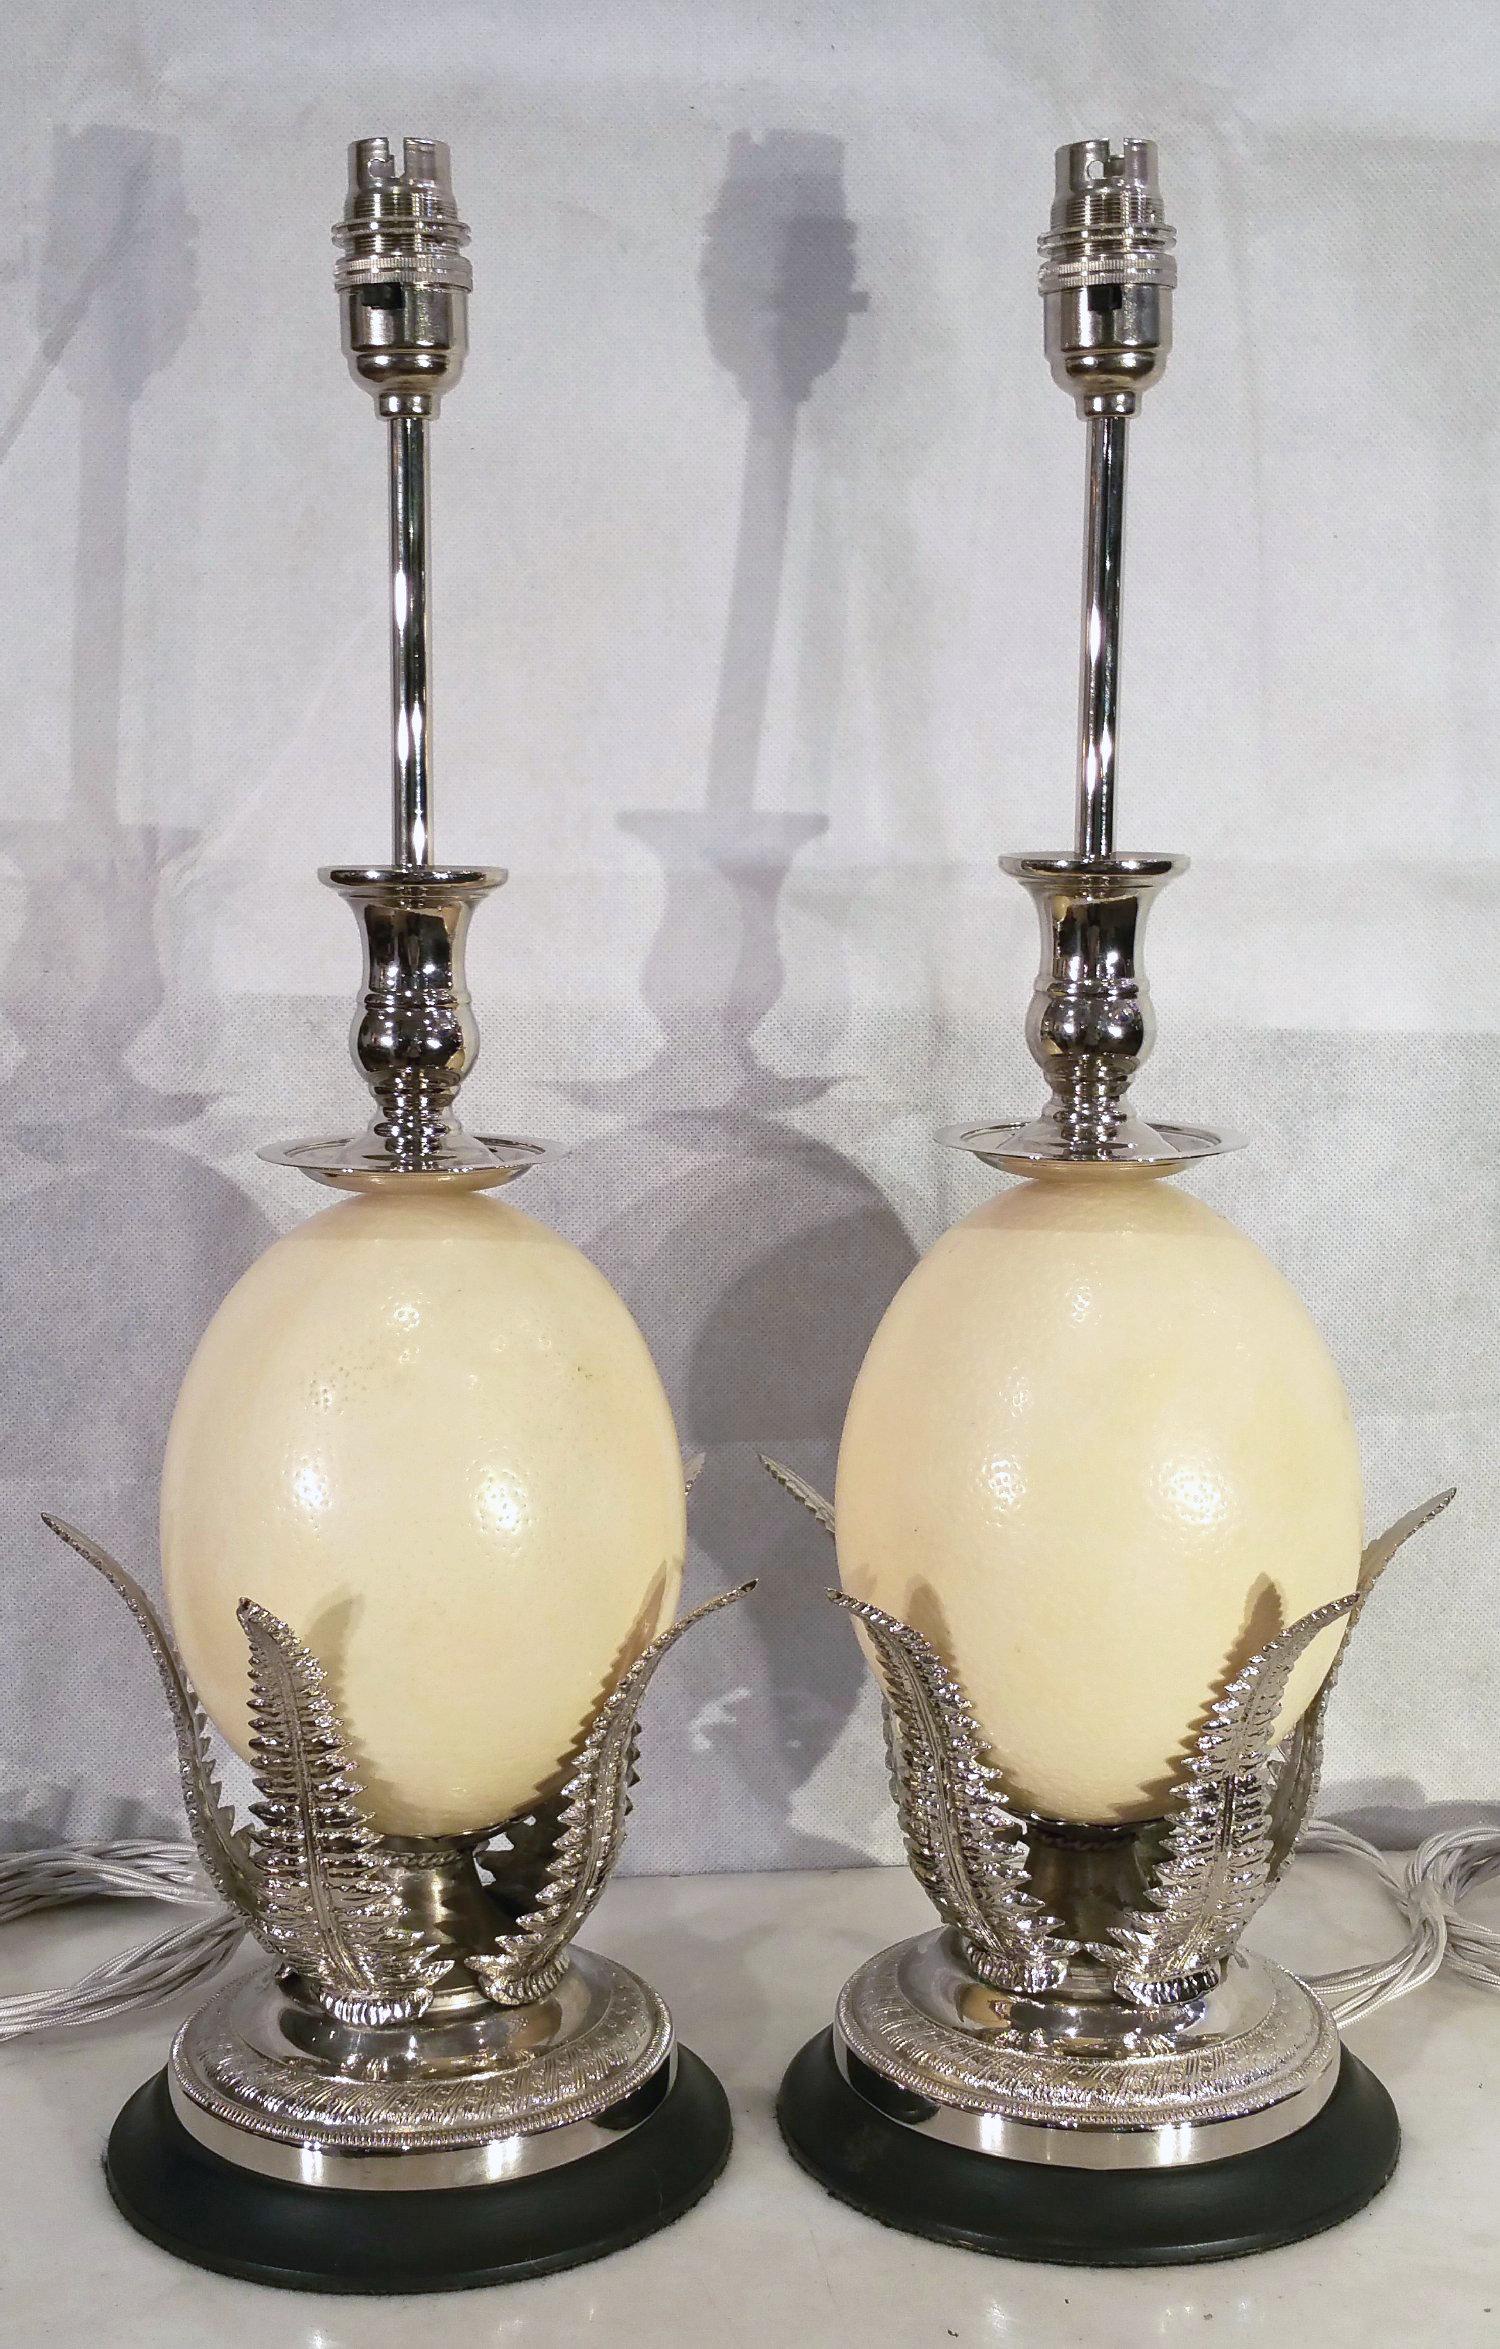 This highly decorative and unusual pair of Ostrich Egg table lamps has been designed in the Georgian style and rest on a bed of silver plated shaped fern leaves, on a circular base. The lamps feature an elongated neck with a bayonet styled light